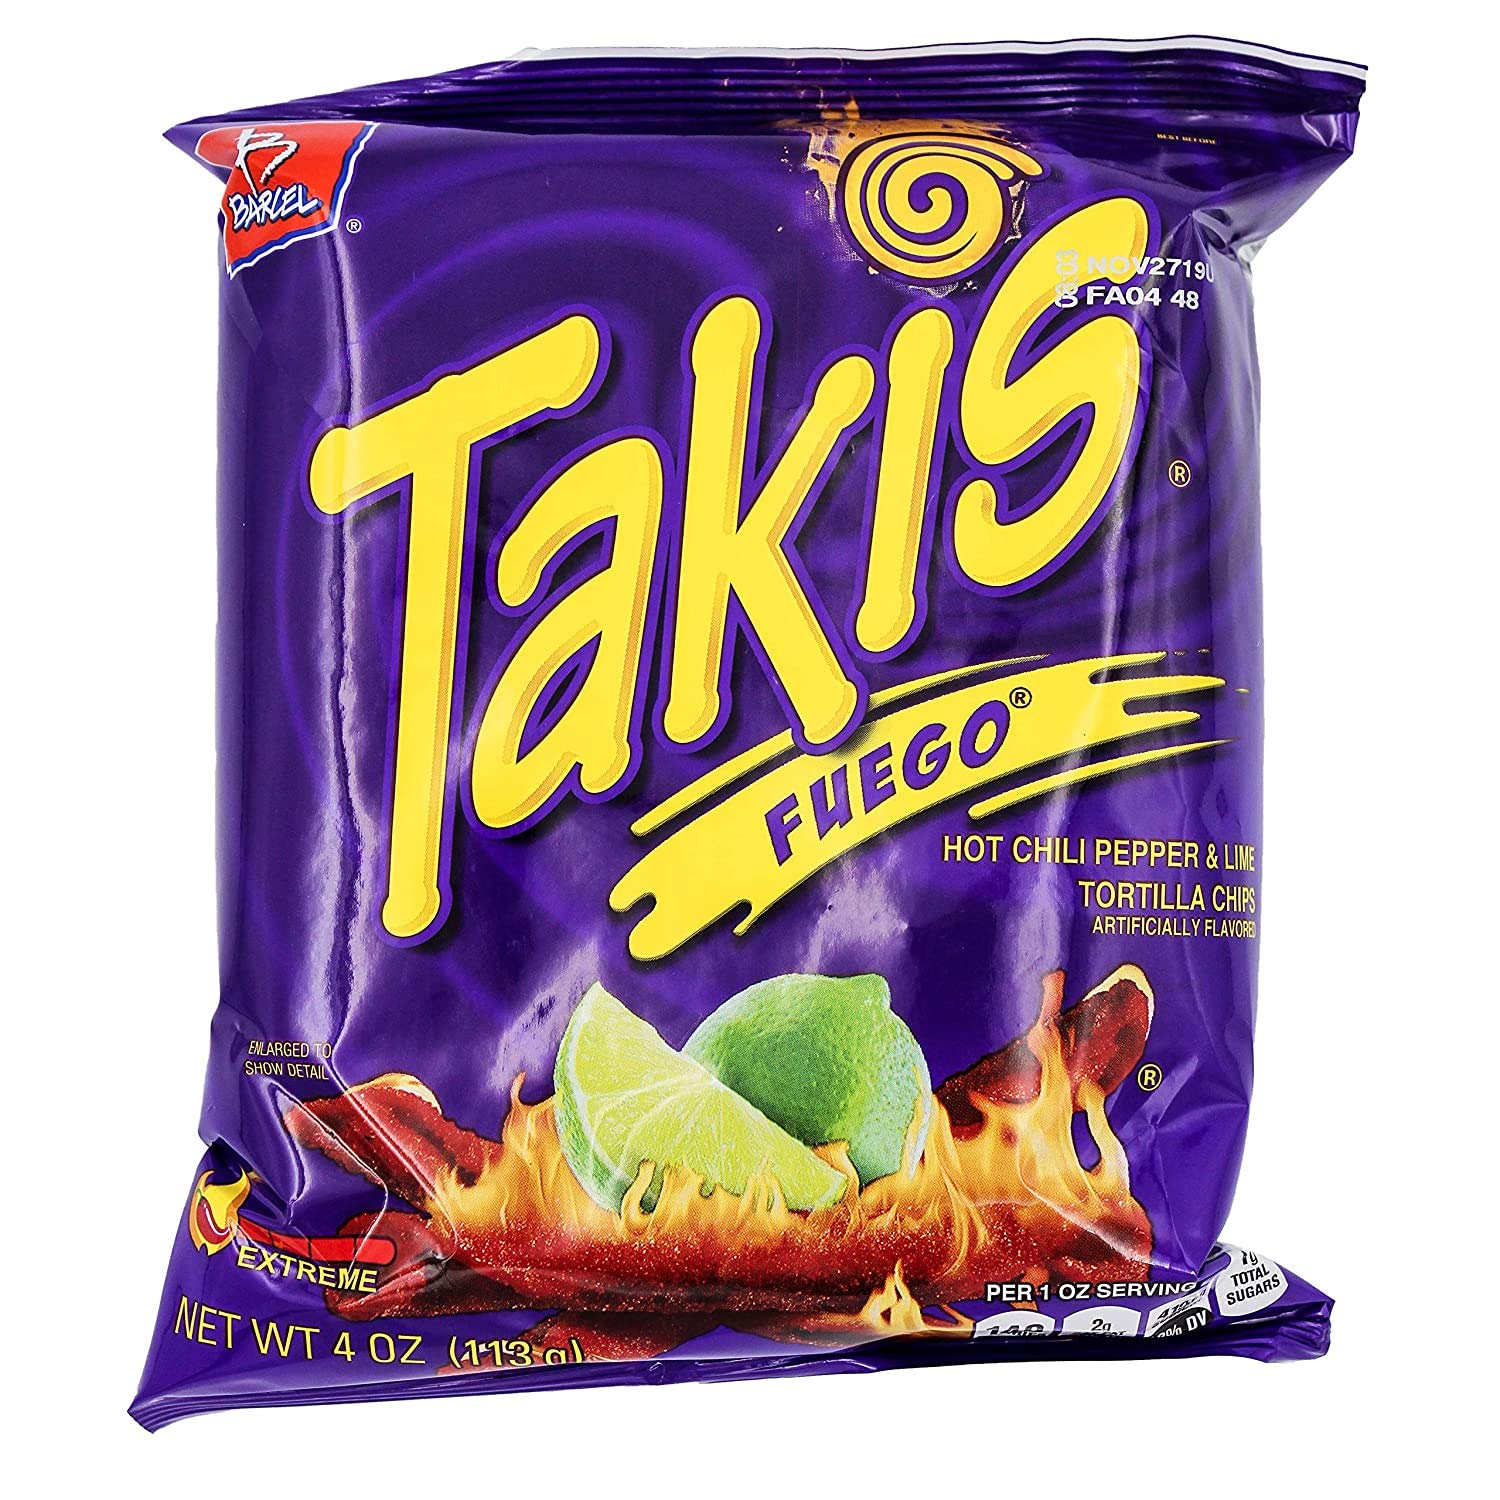 Takis Fuego Hot Chili Pepper & Lime Tortilla Chips 4oz (12-Bags)